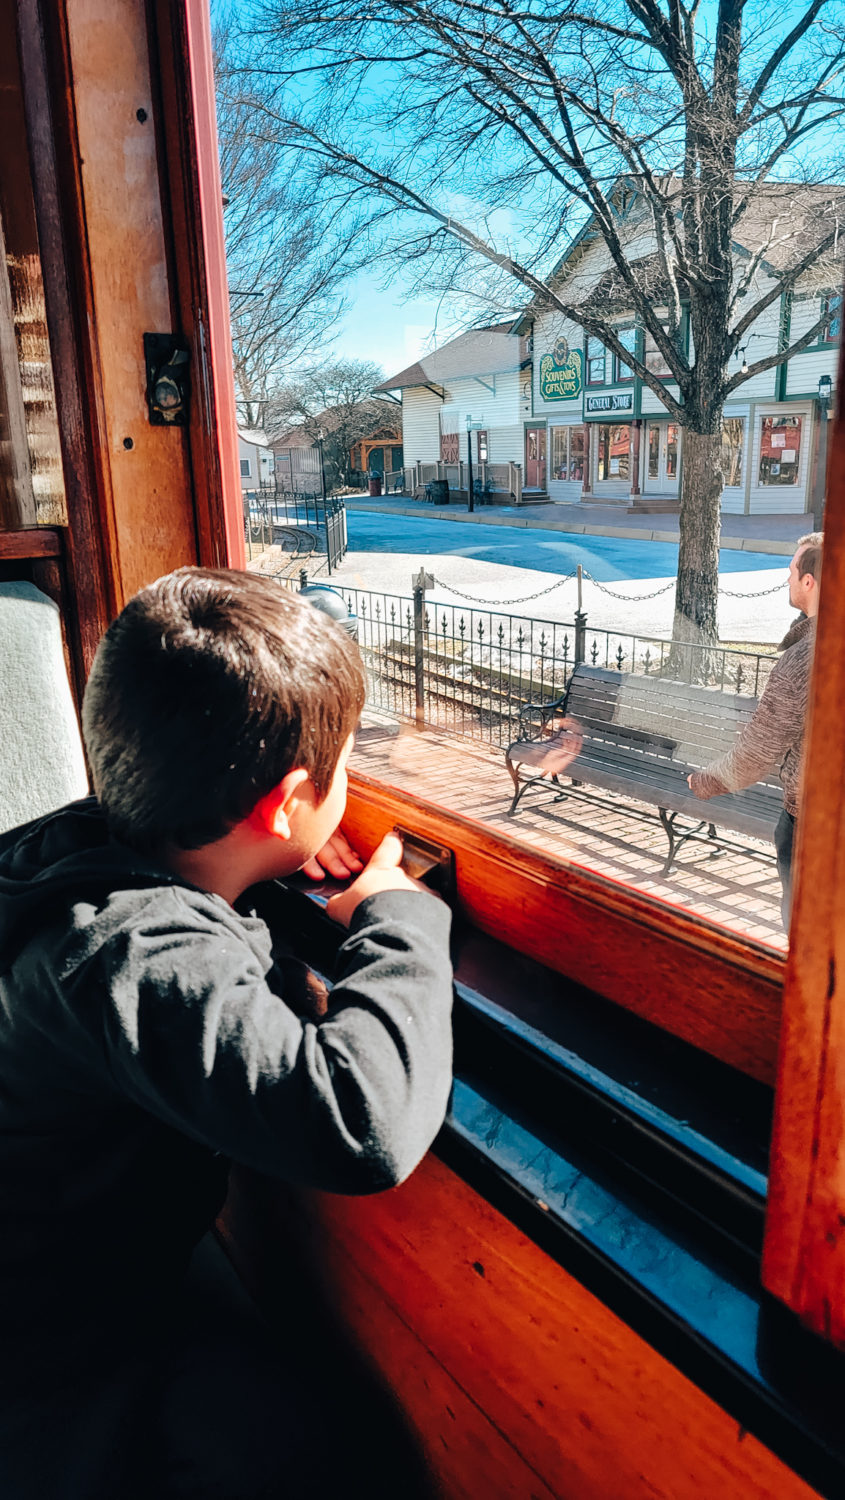 Son looking out the window on a train